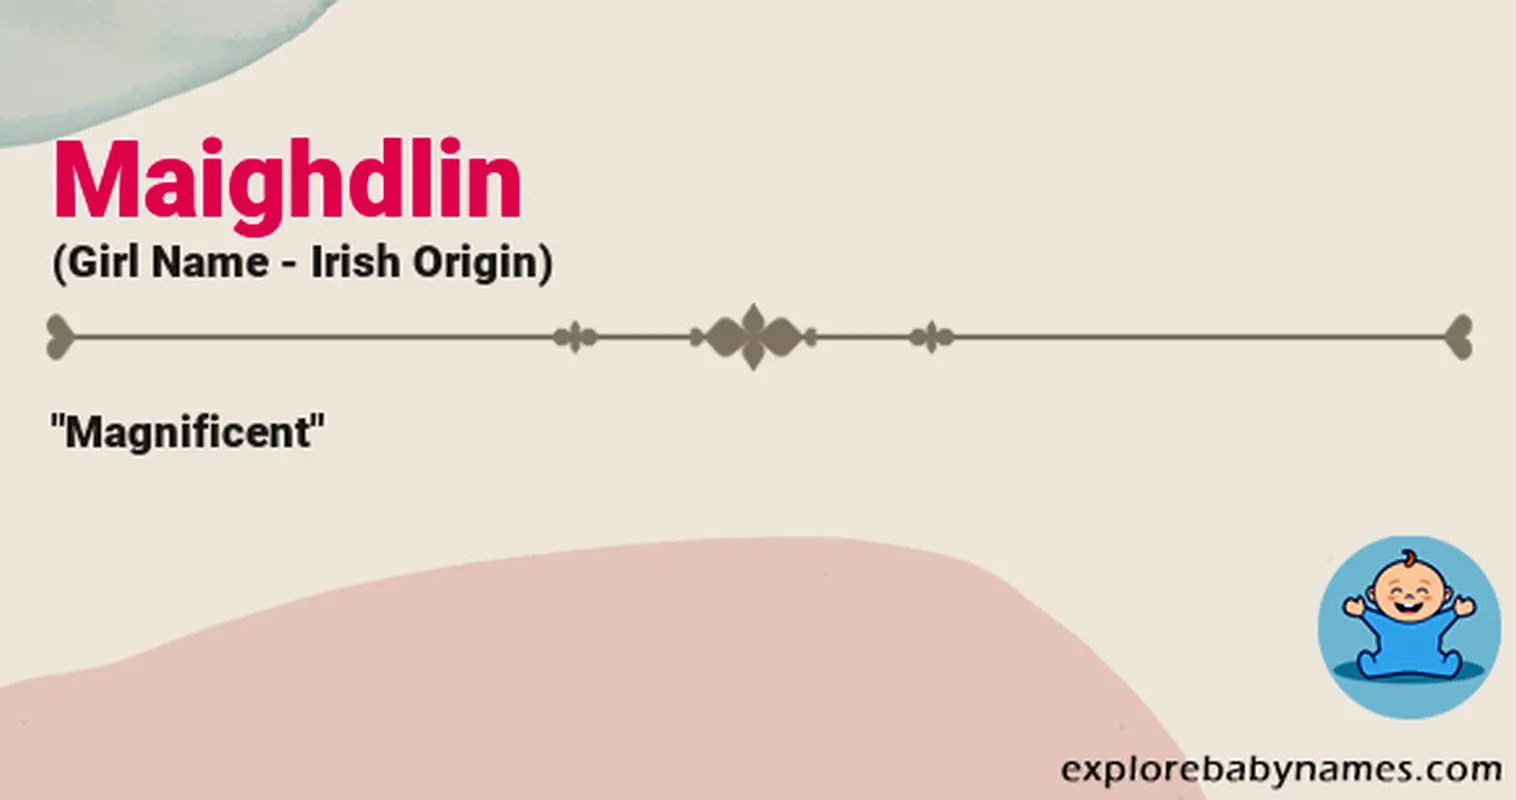 Meaning of Maighdlin